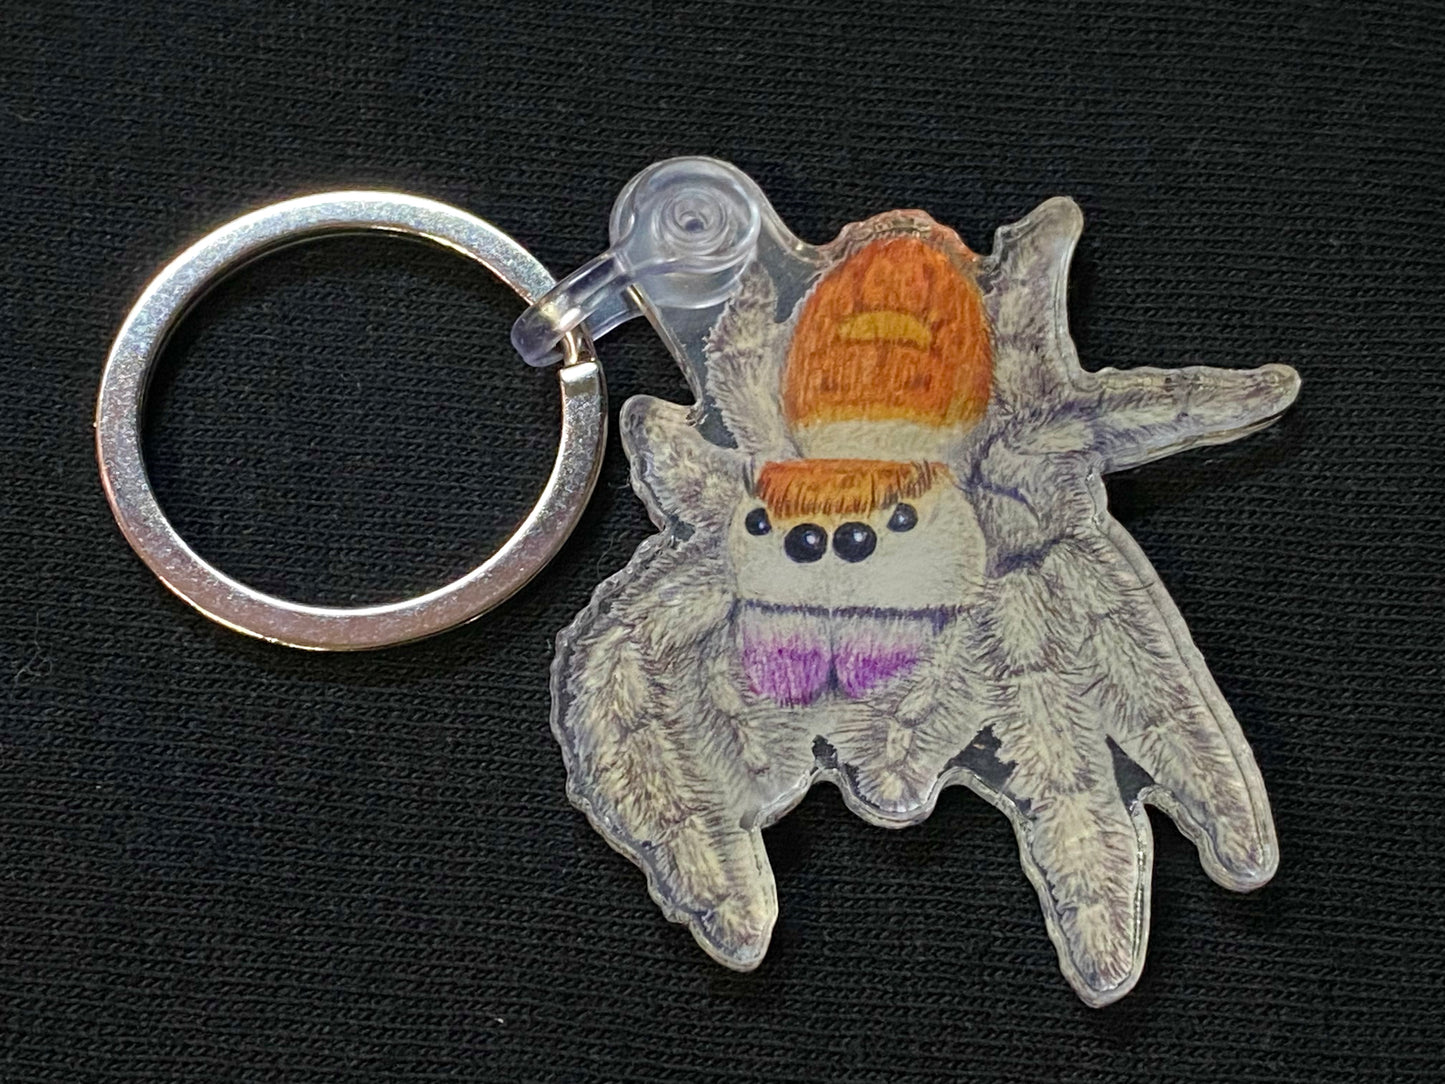 2” Acrylic keychain (jumping spider)